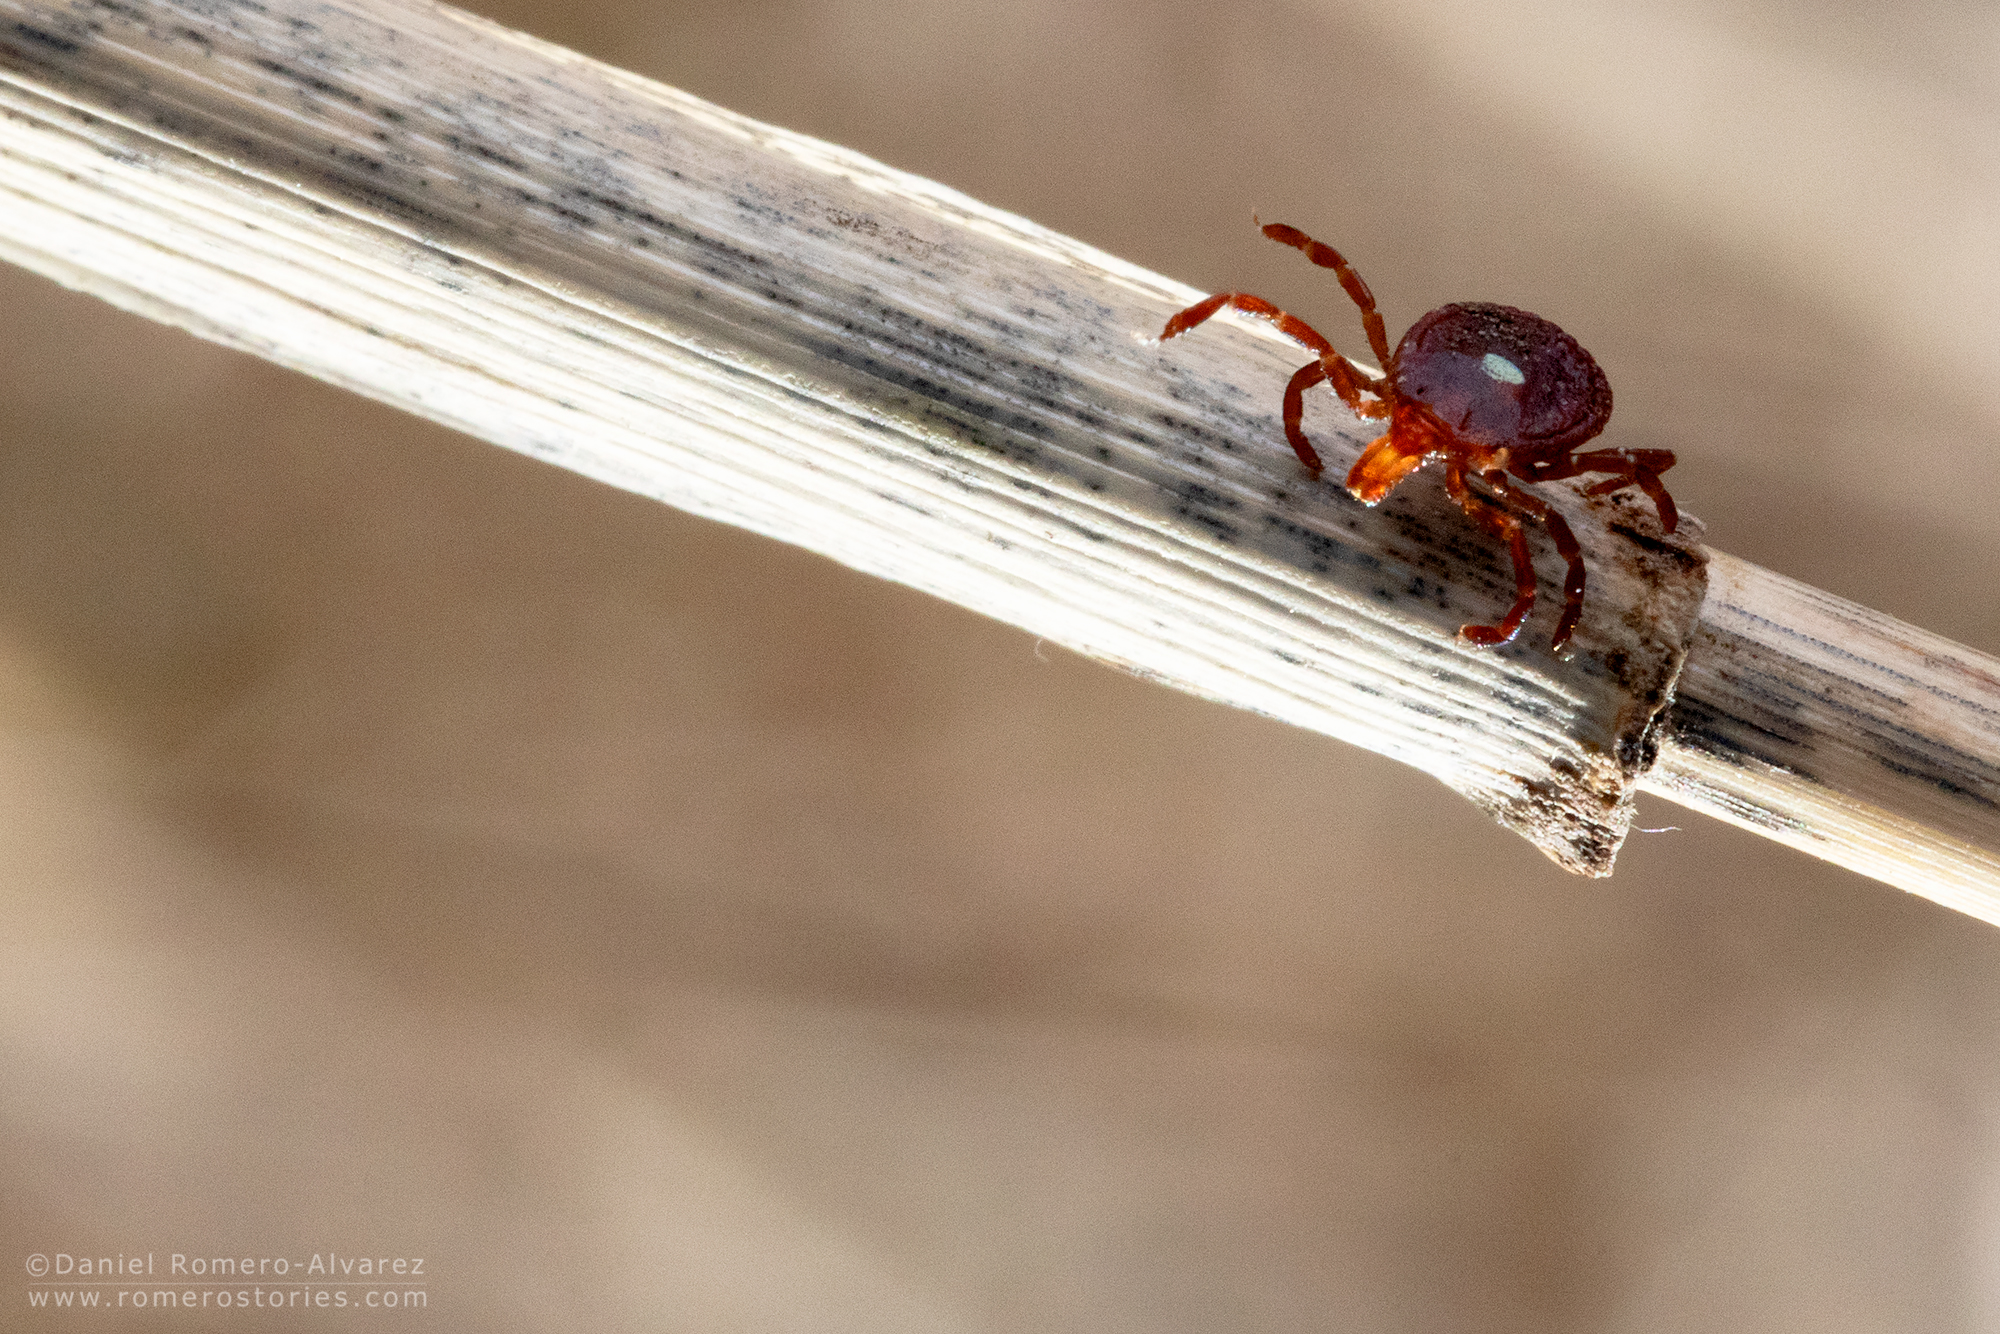 A tick crawls on a piece of wood